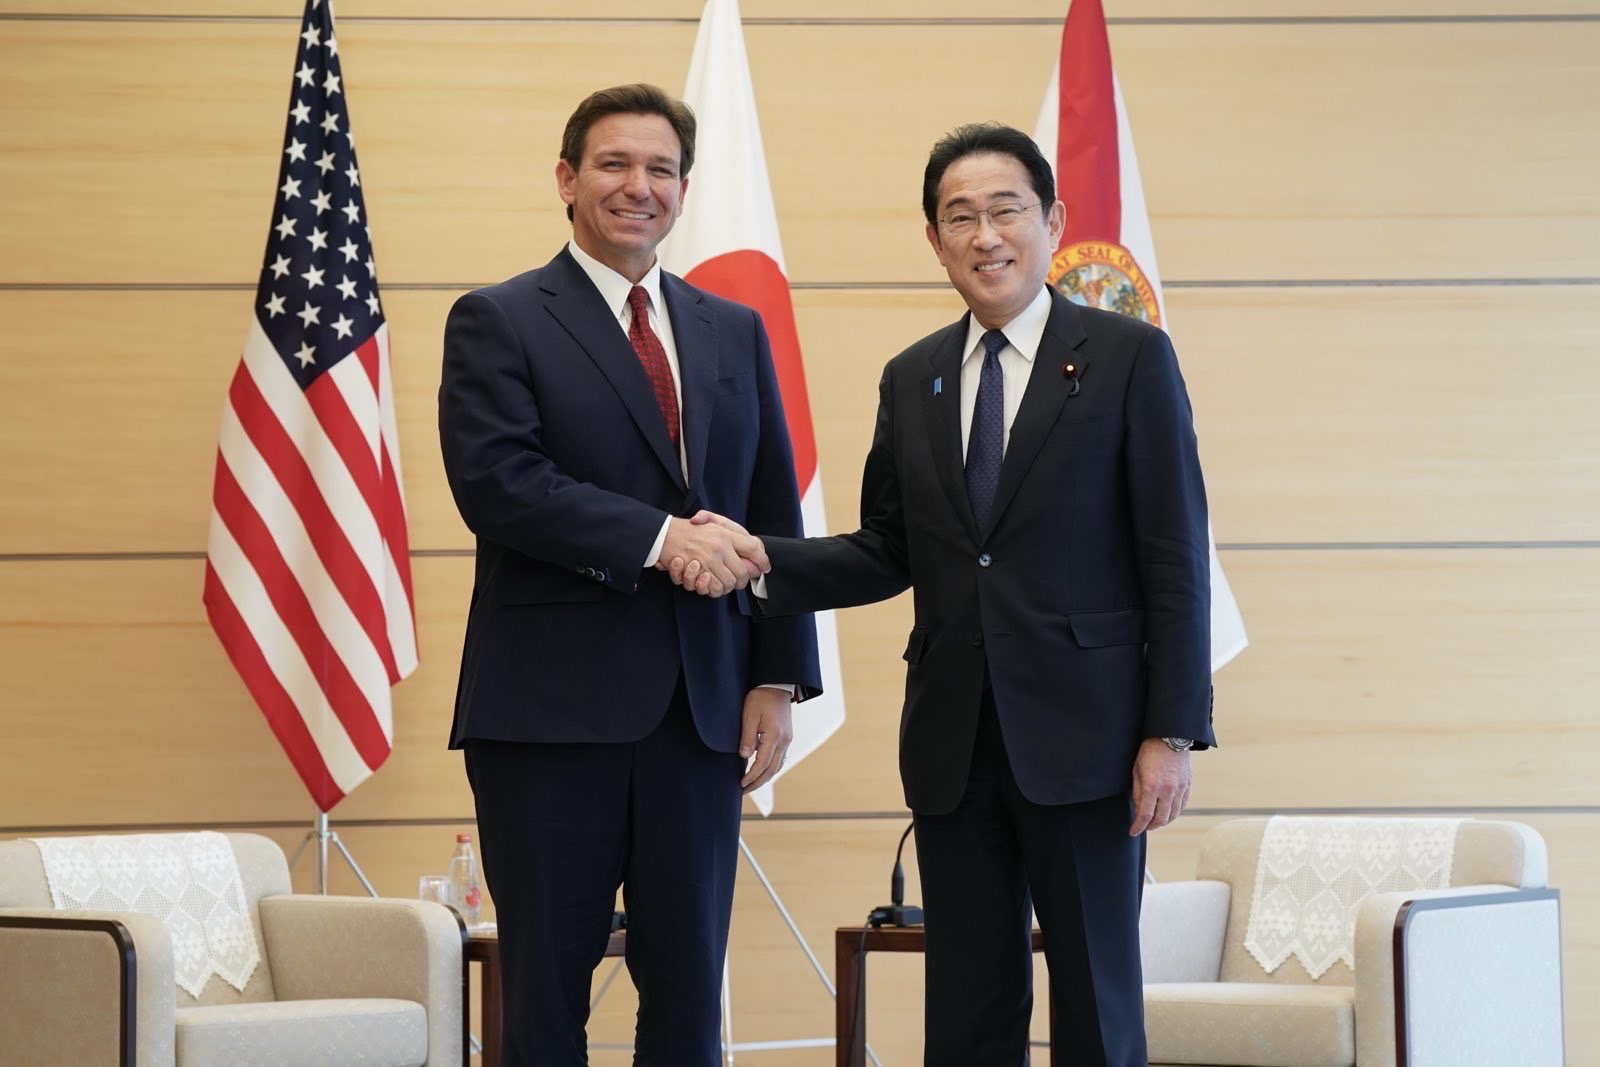 Asia, Israel and the United Kingdom.  DeSantis’ near-candidate tour